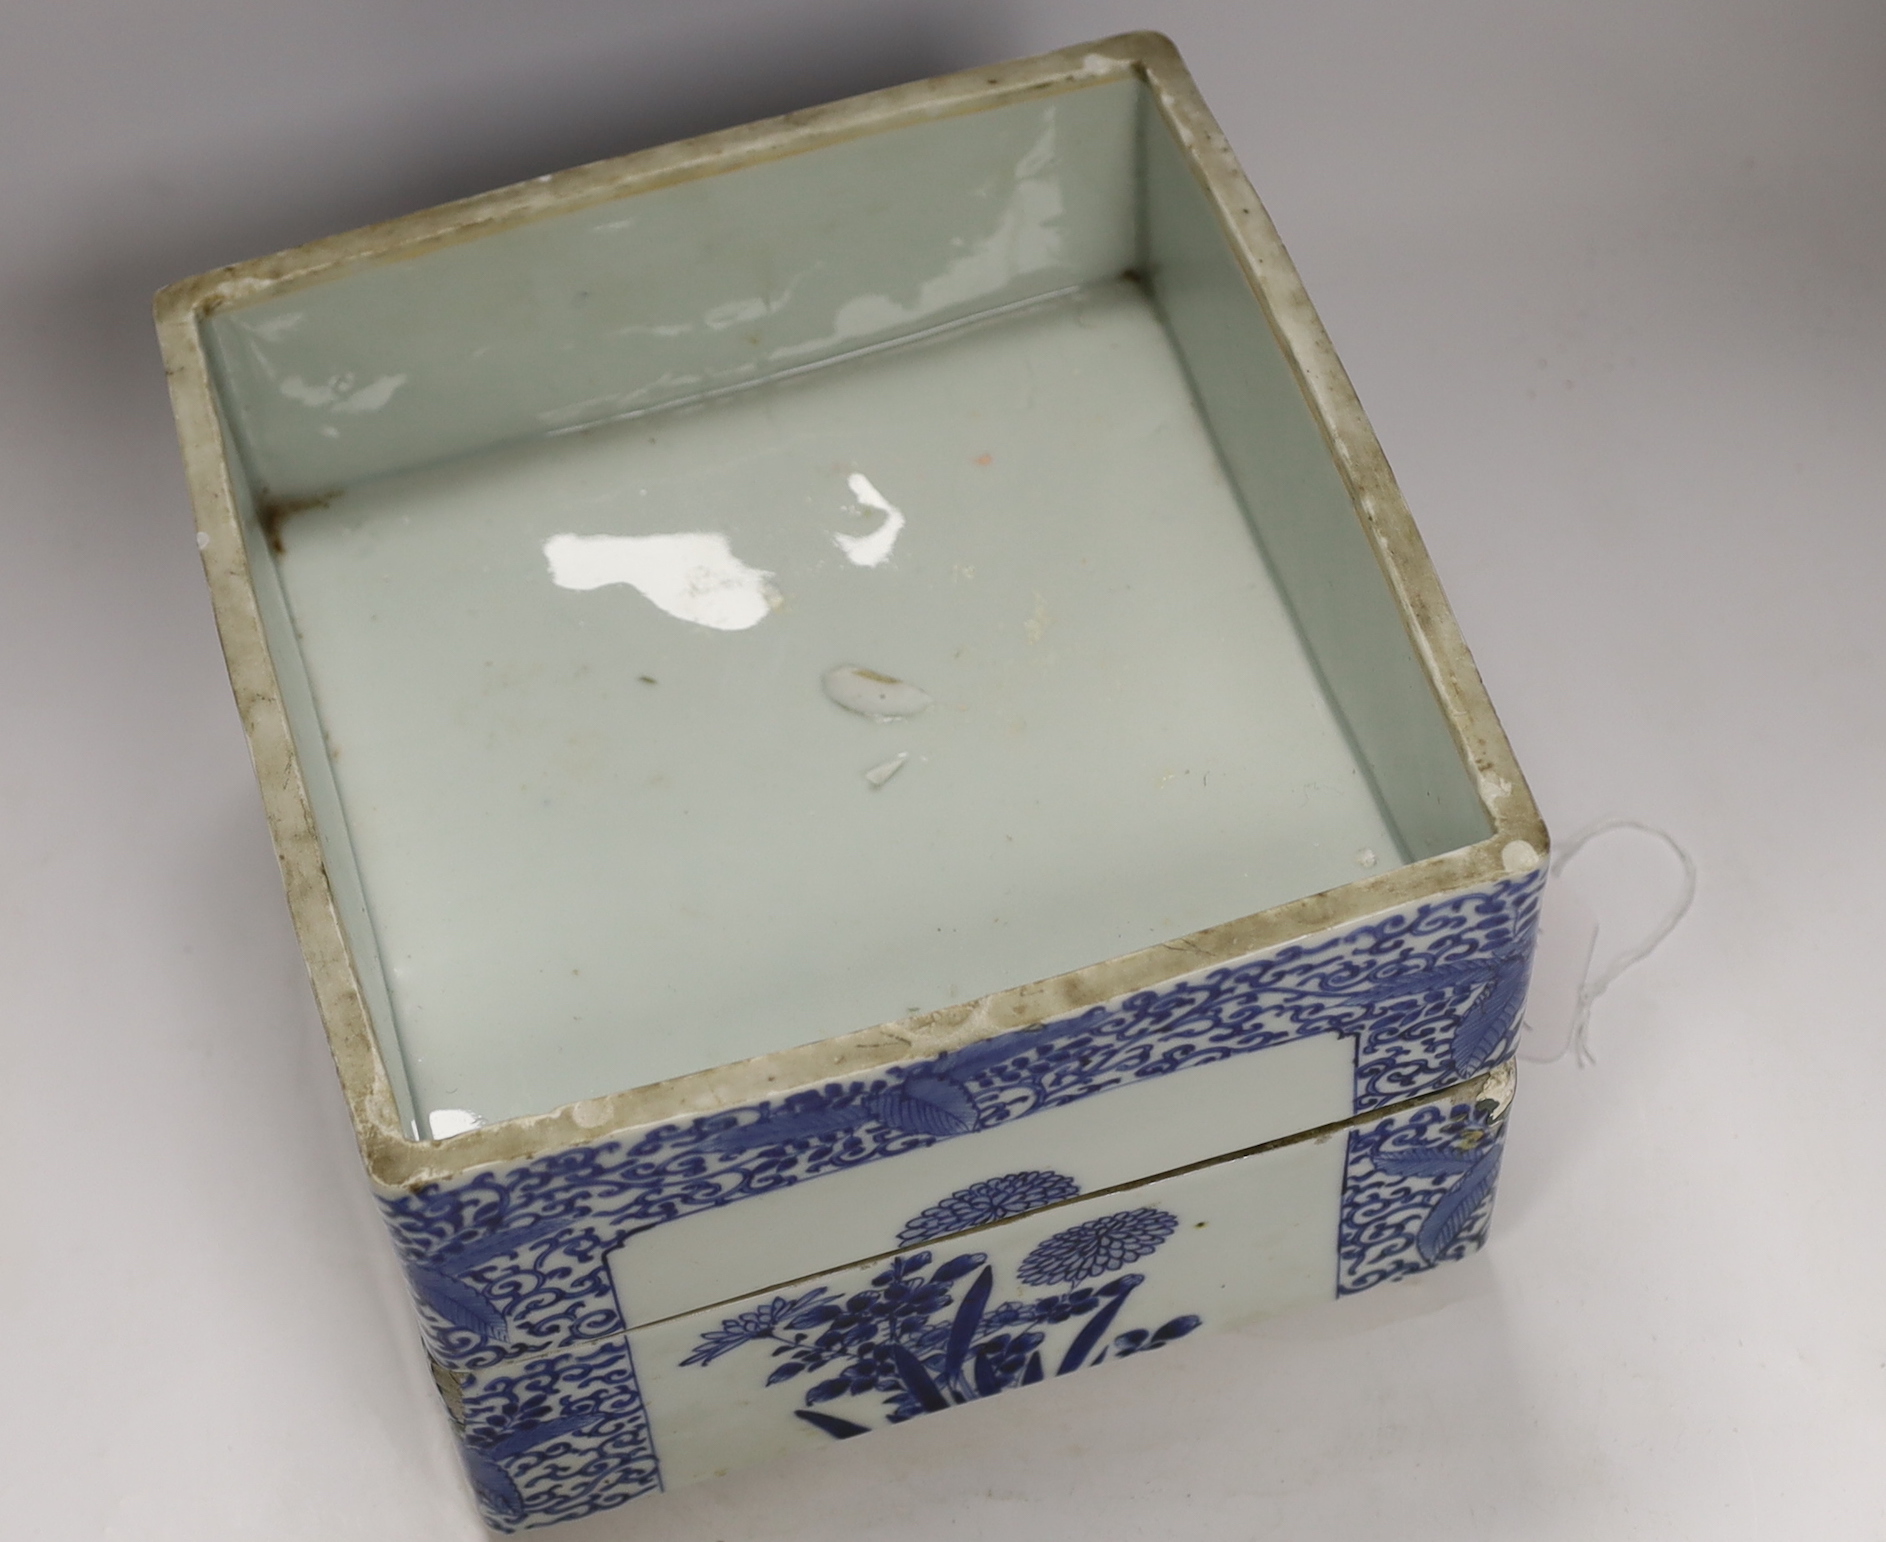 A Japanese blue and white floral, two tier food container with cover, 23cm high